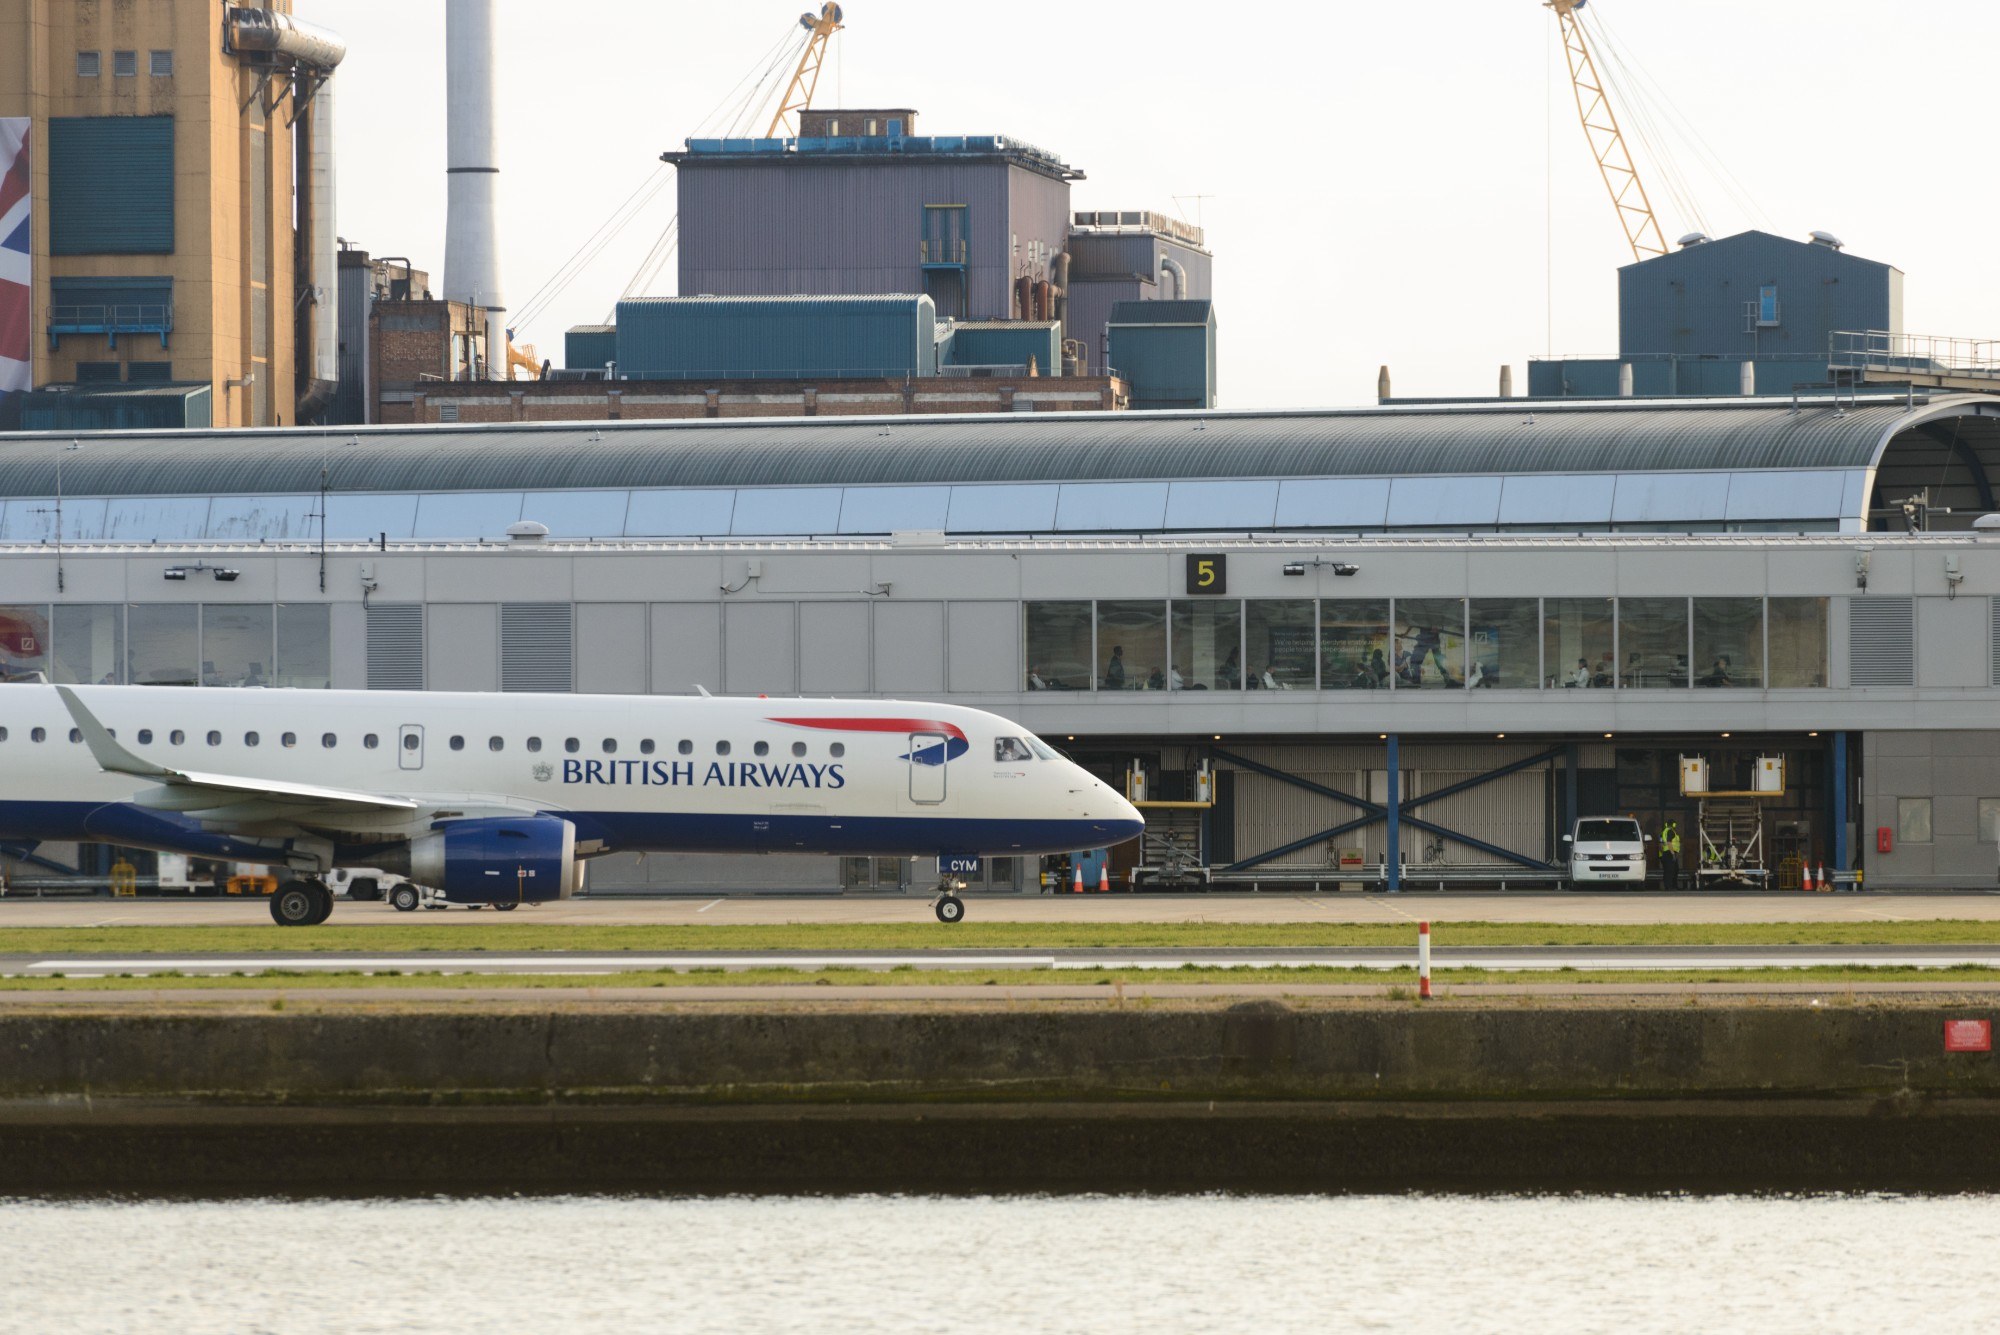 A British Airways plane on the runway at London City Airport